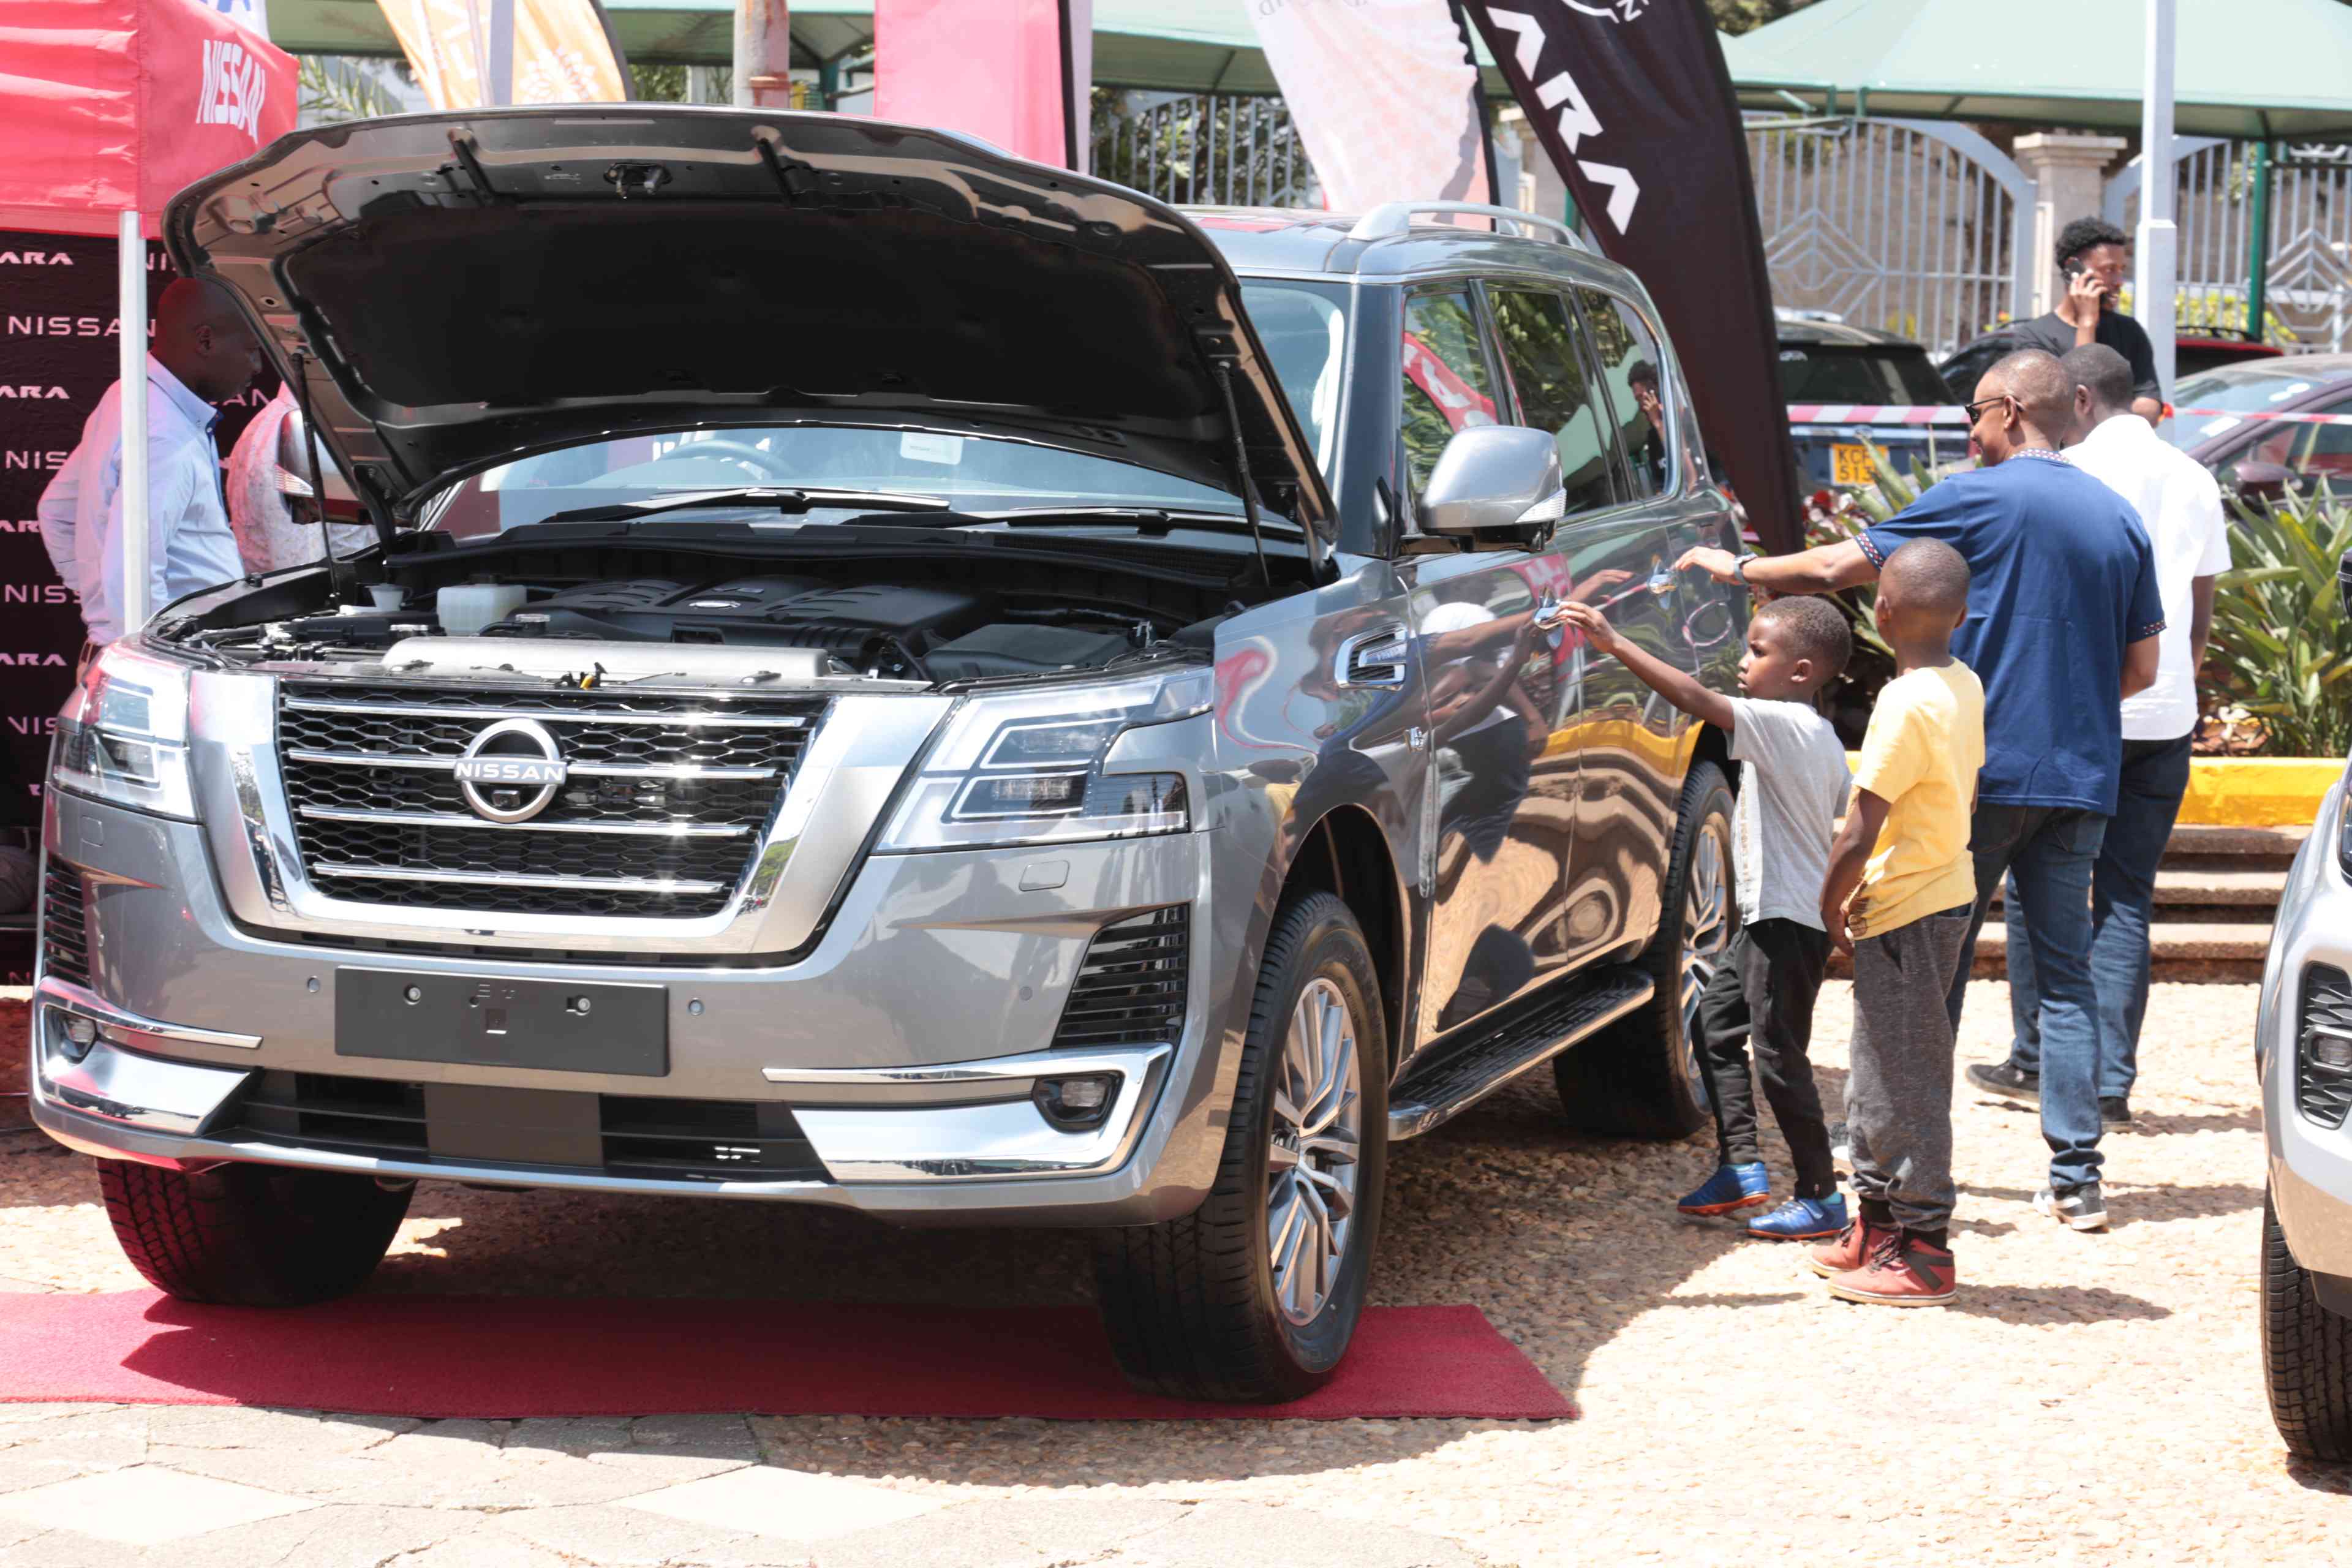 Visitors checking out the all new Nissan Patrol